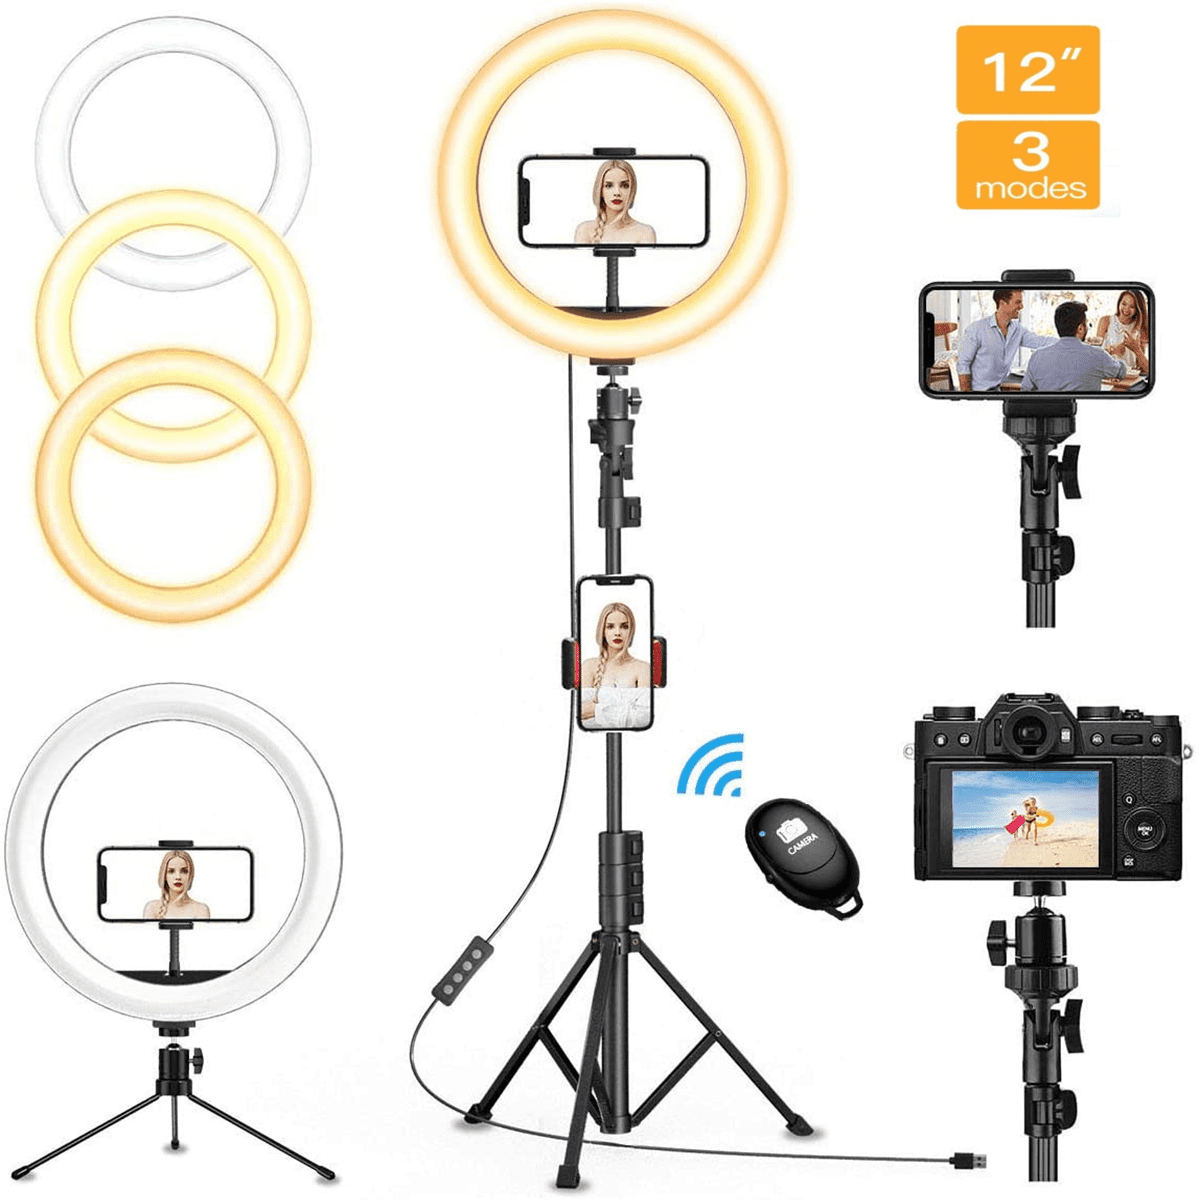 LED Ring Light 6 10 Brightness Levels,3 Light Modes with Adjustable Tripod Stand and Cell Phone Holde for Live Streaming & YouTube Video Dimmable Desk Makeup Ring Light for Photography